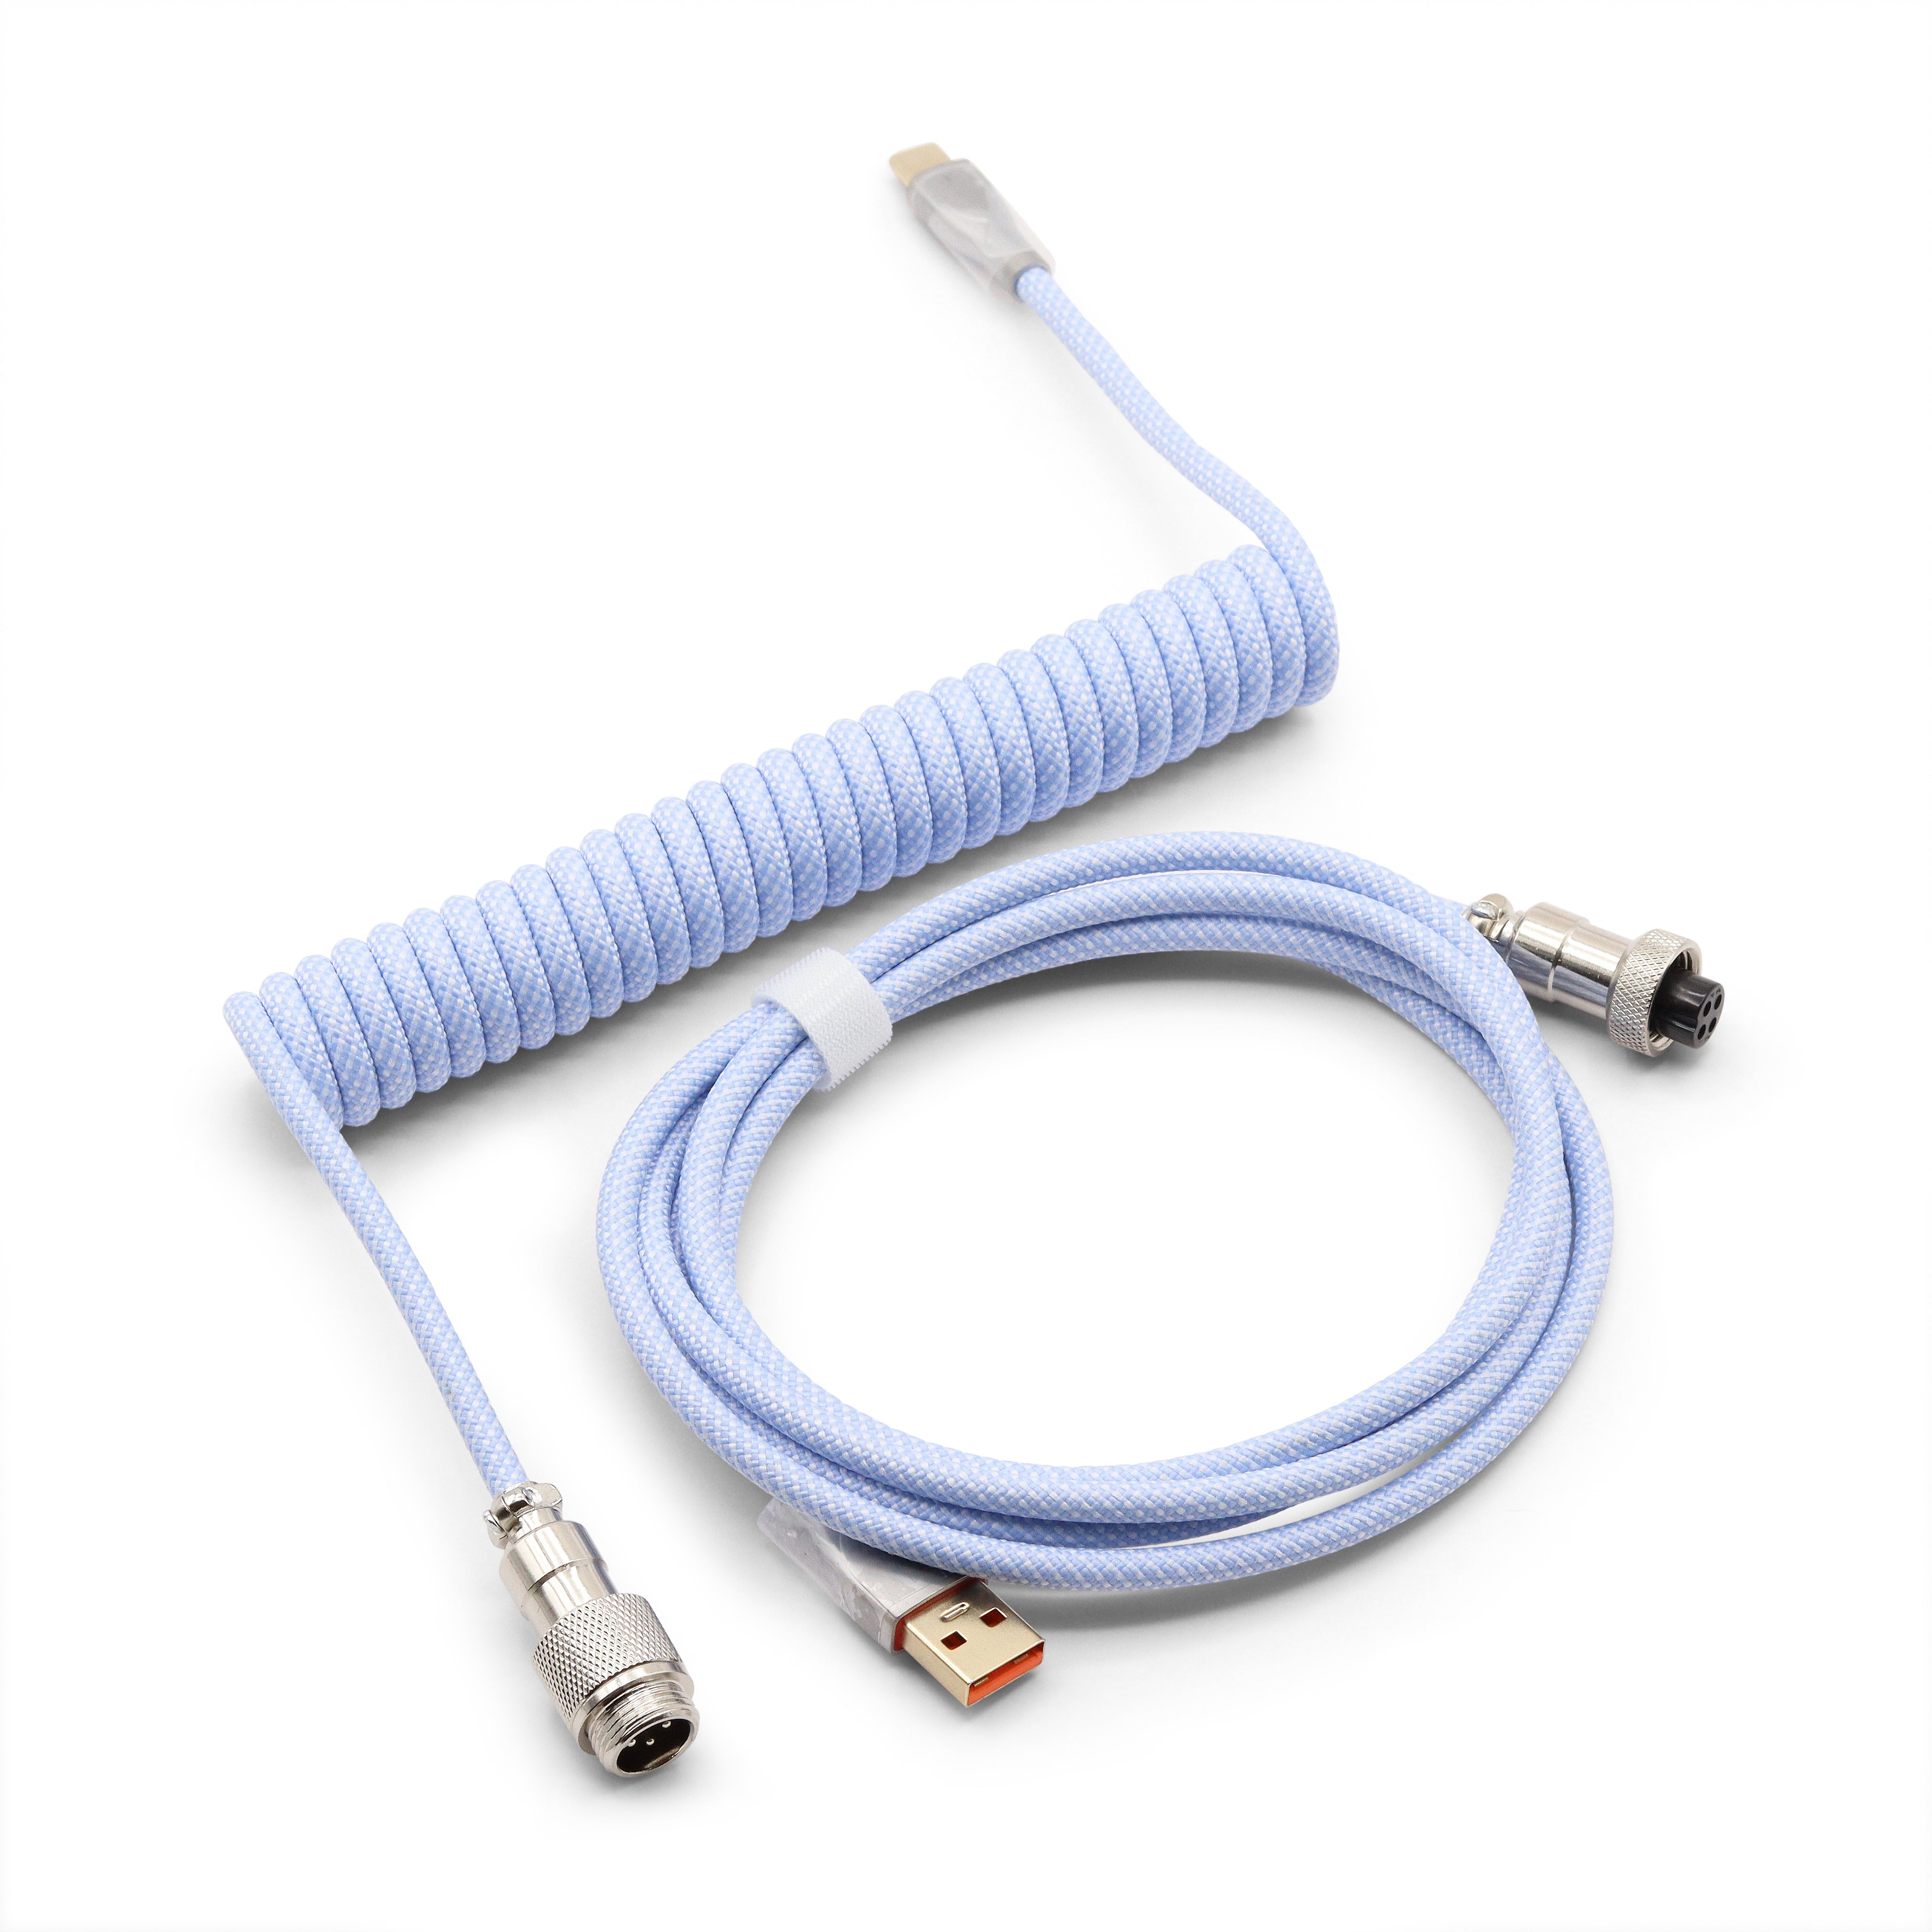 Glacier Premium Durable Quality Braided USB-C to USB-A Coiled Cable with Detachable Metal Aviator Connector Plug for Mechanical Keyboard-Blue-